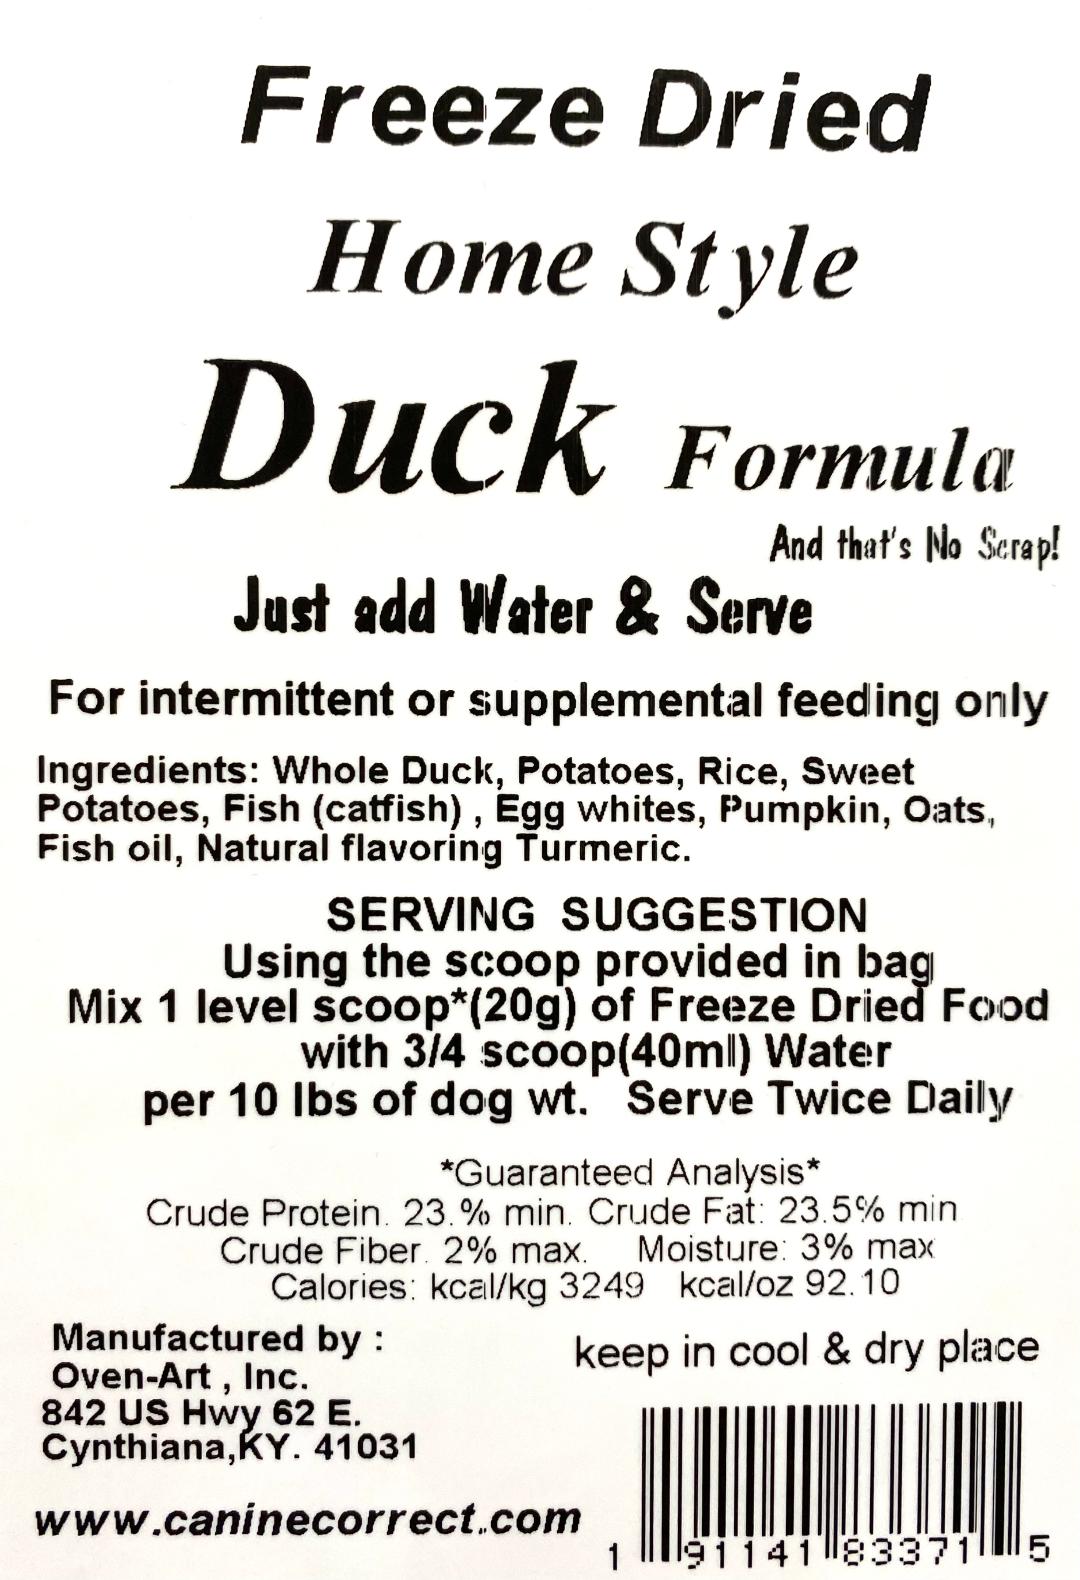 Canine Correct Home-Style Duck Formula